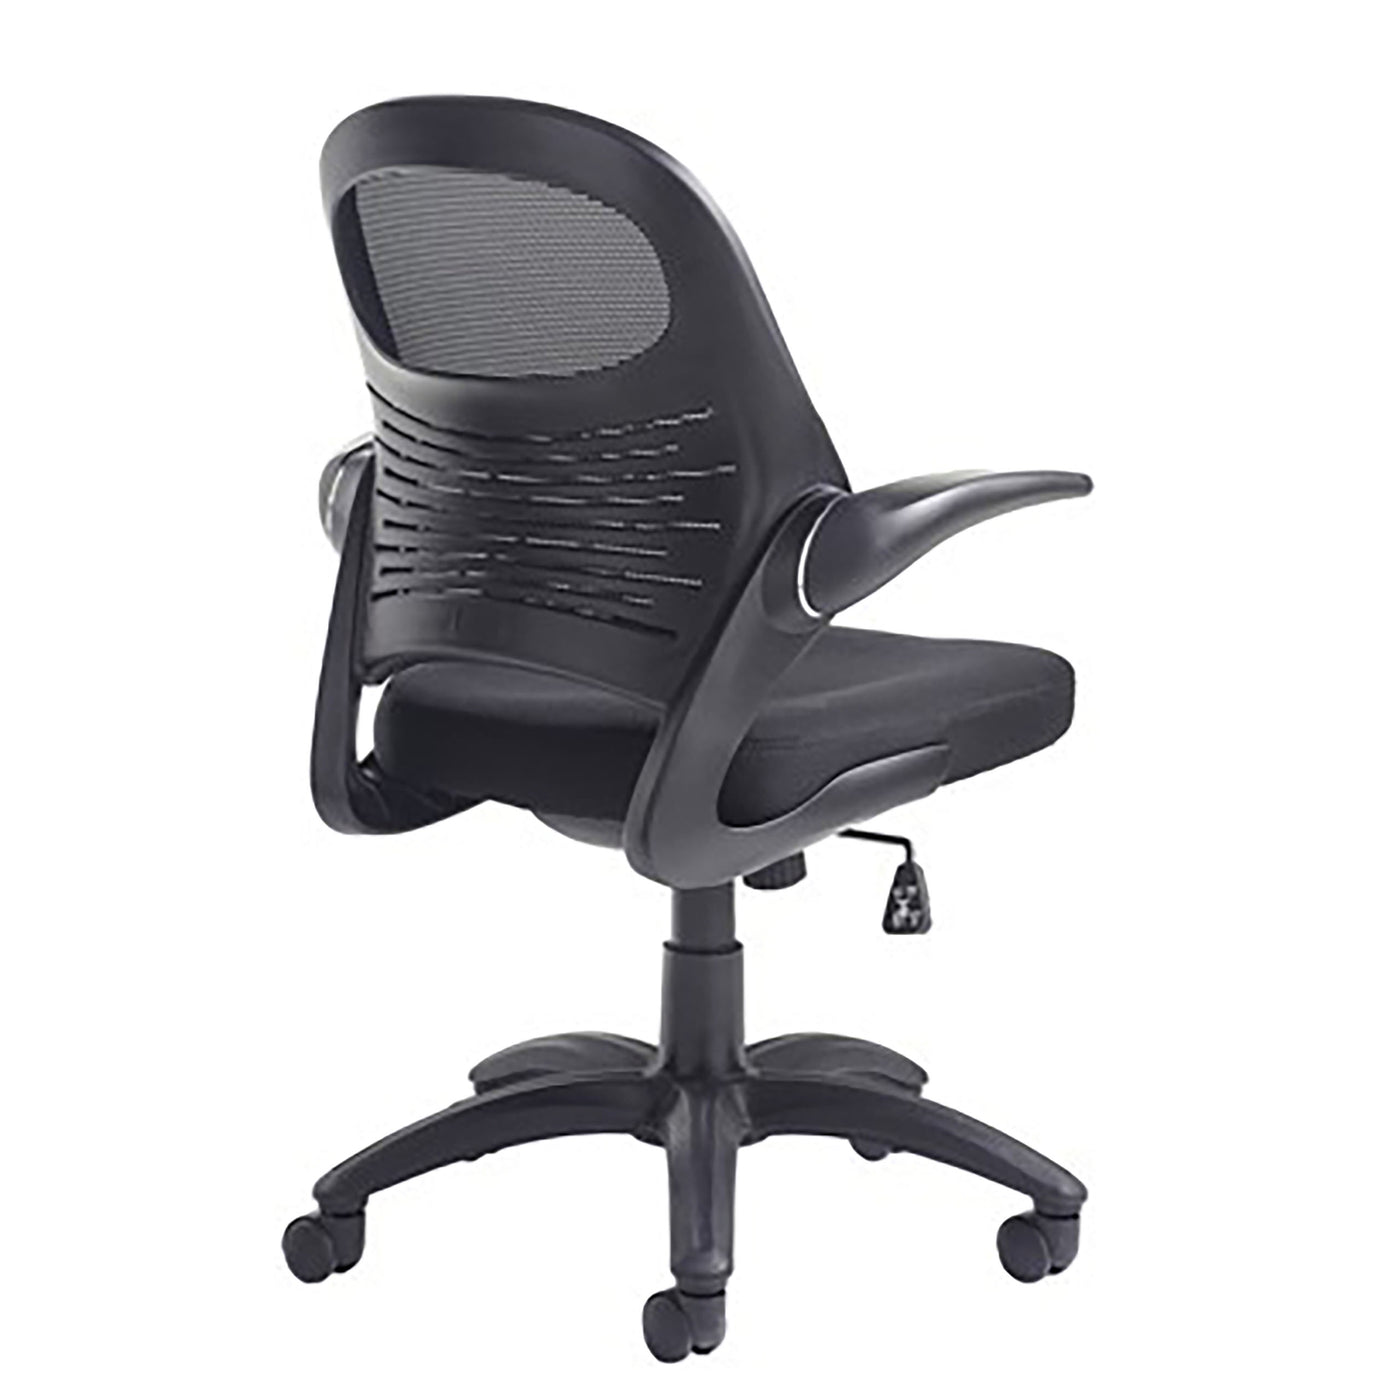 Orion Home Office Chair | Ergonomic Home Office Chair 